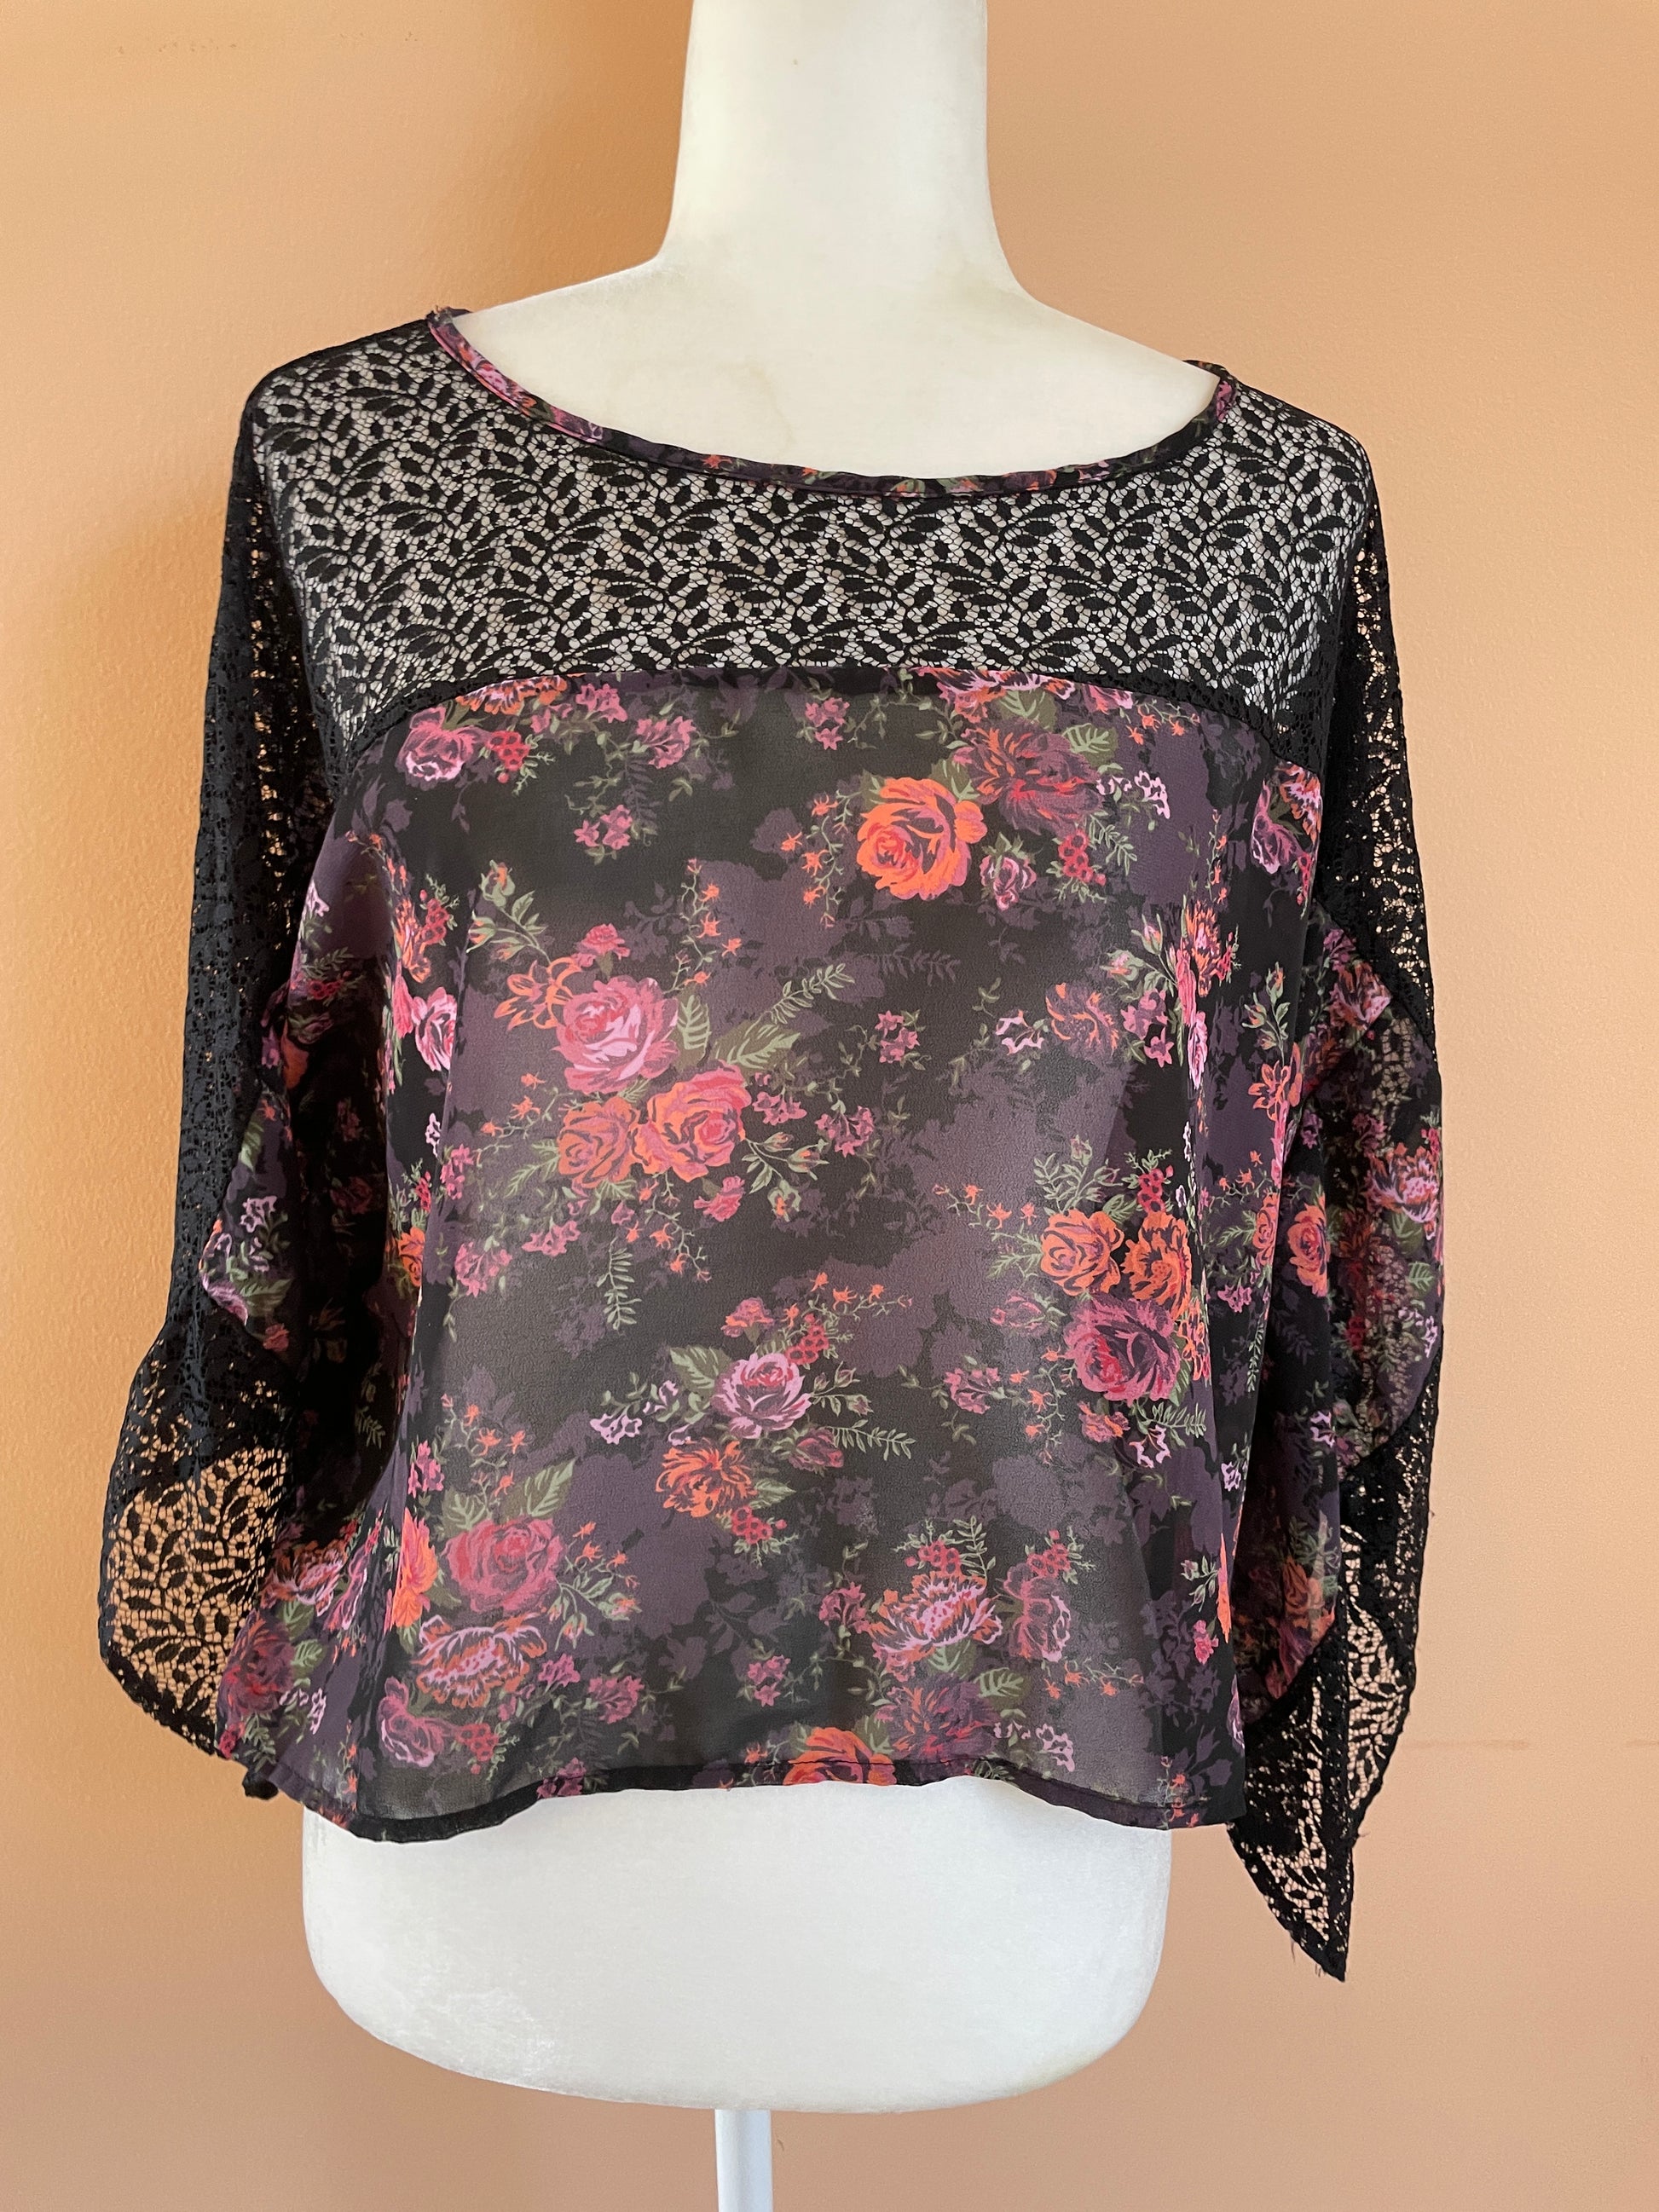  90s  Sheer Floral Black Lace Boho Top S